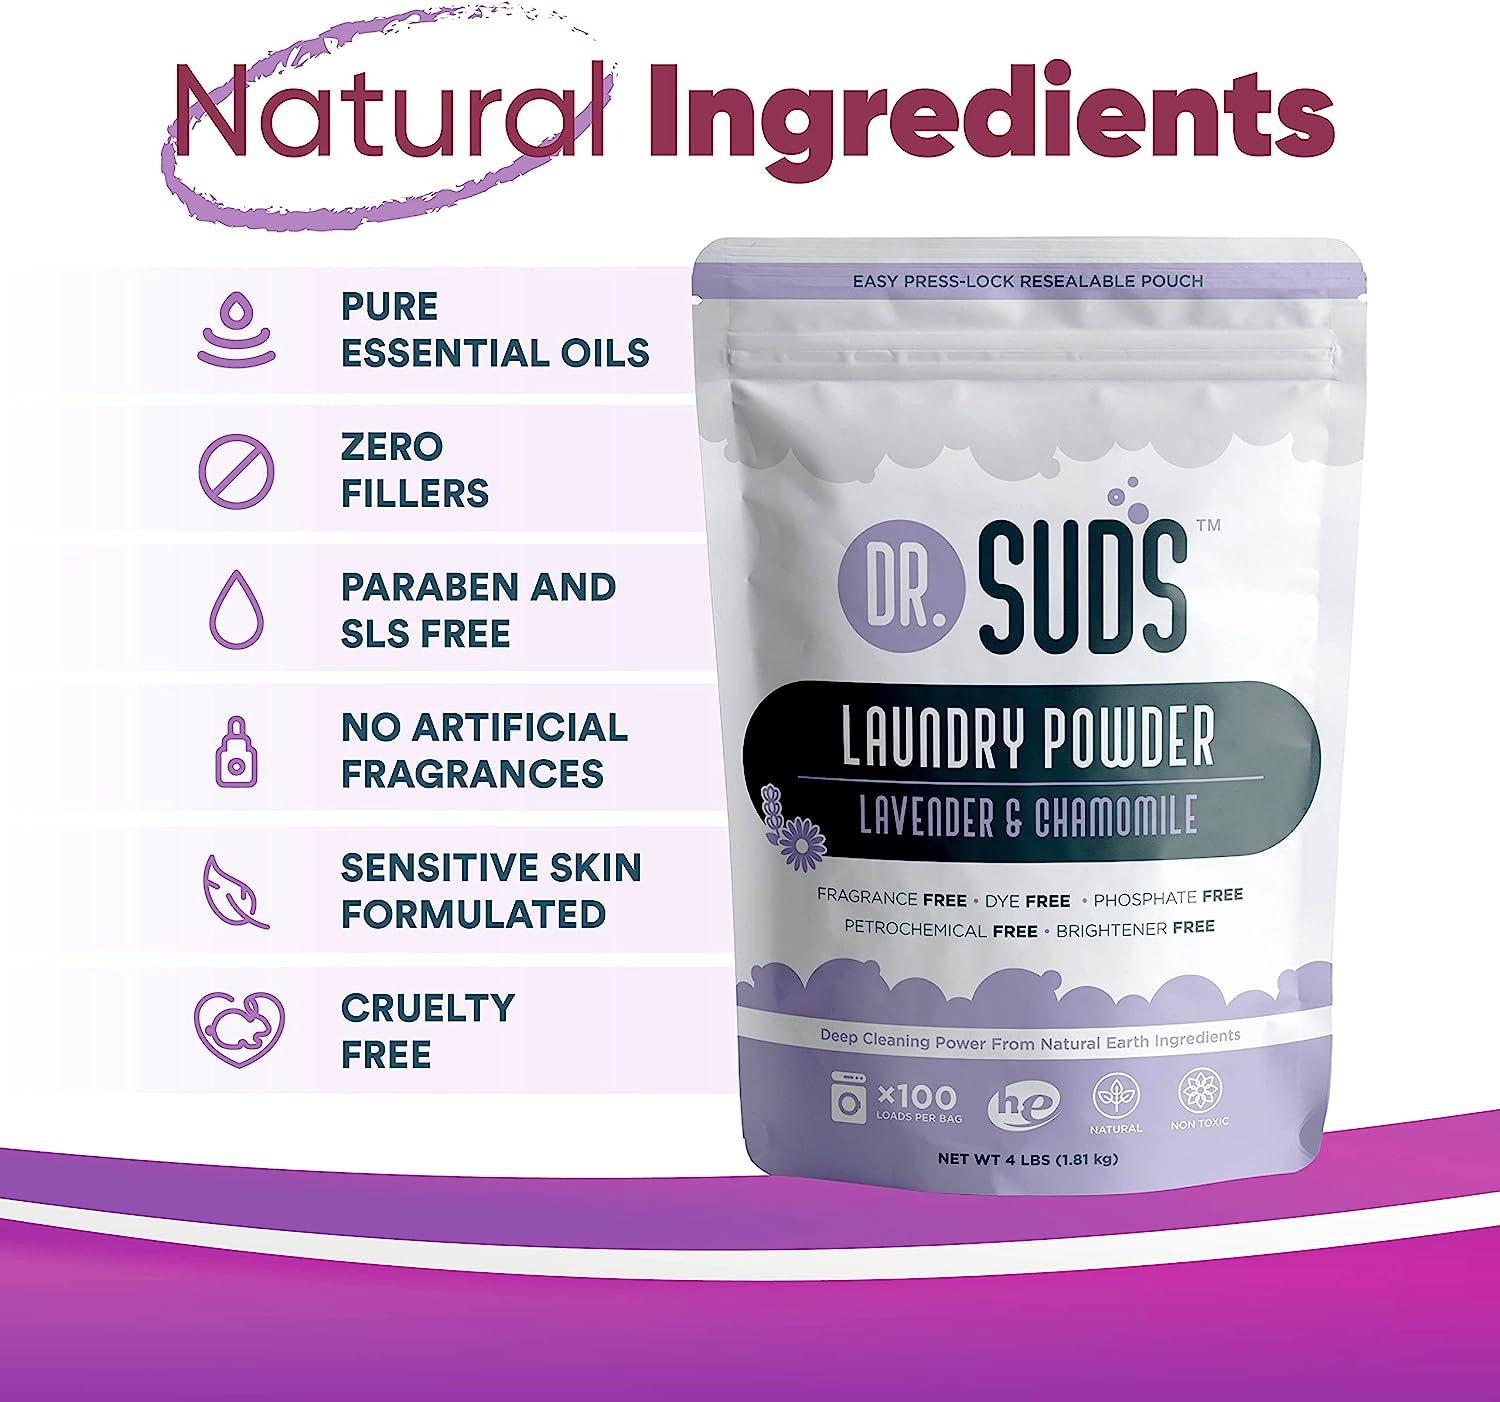  New Dr Suds Natural Laundry Detergent Powder 100+ Loads  Lavender Chamomile Made with Natural Earth Minerals : Health & Household